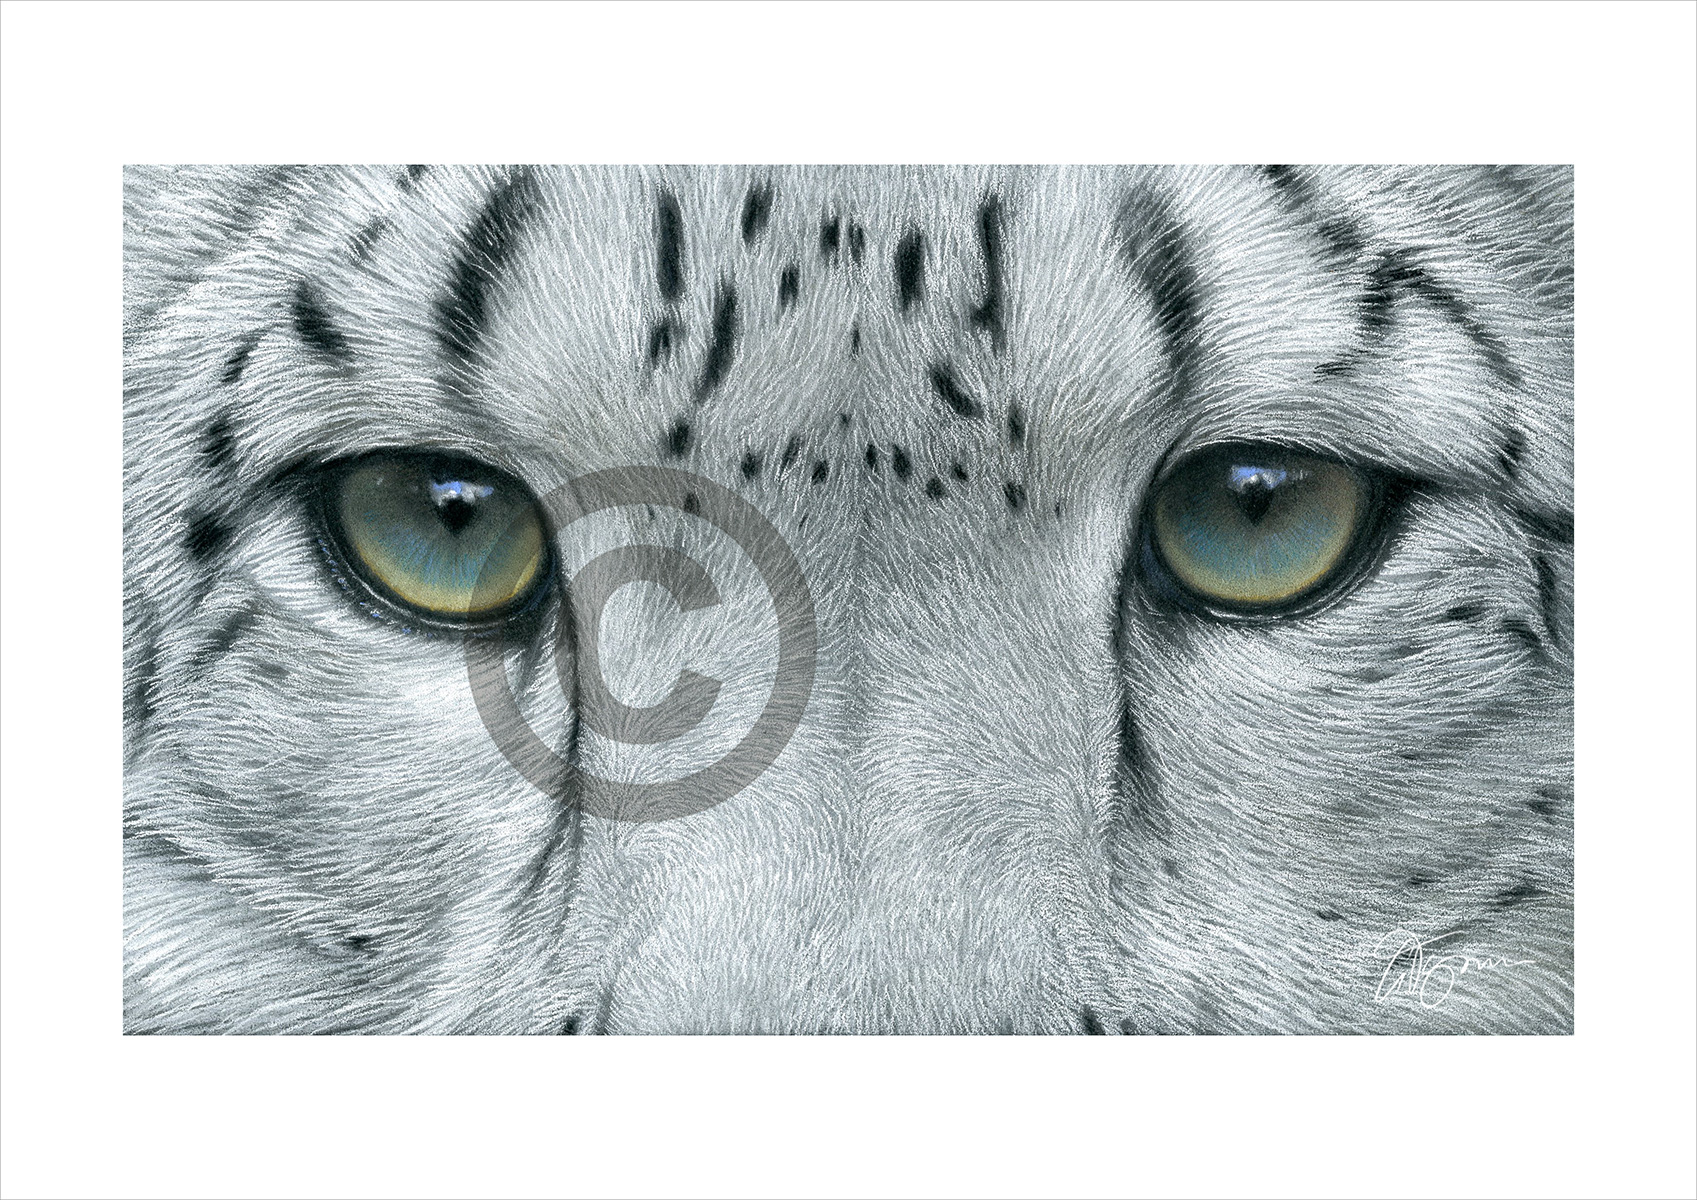 Colour pastel drawing of a Snow Leopard's eyes by artist Gary Tymon